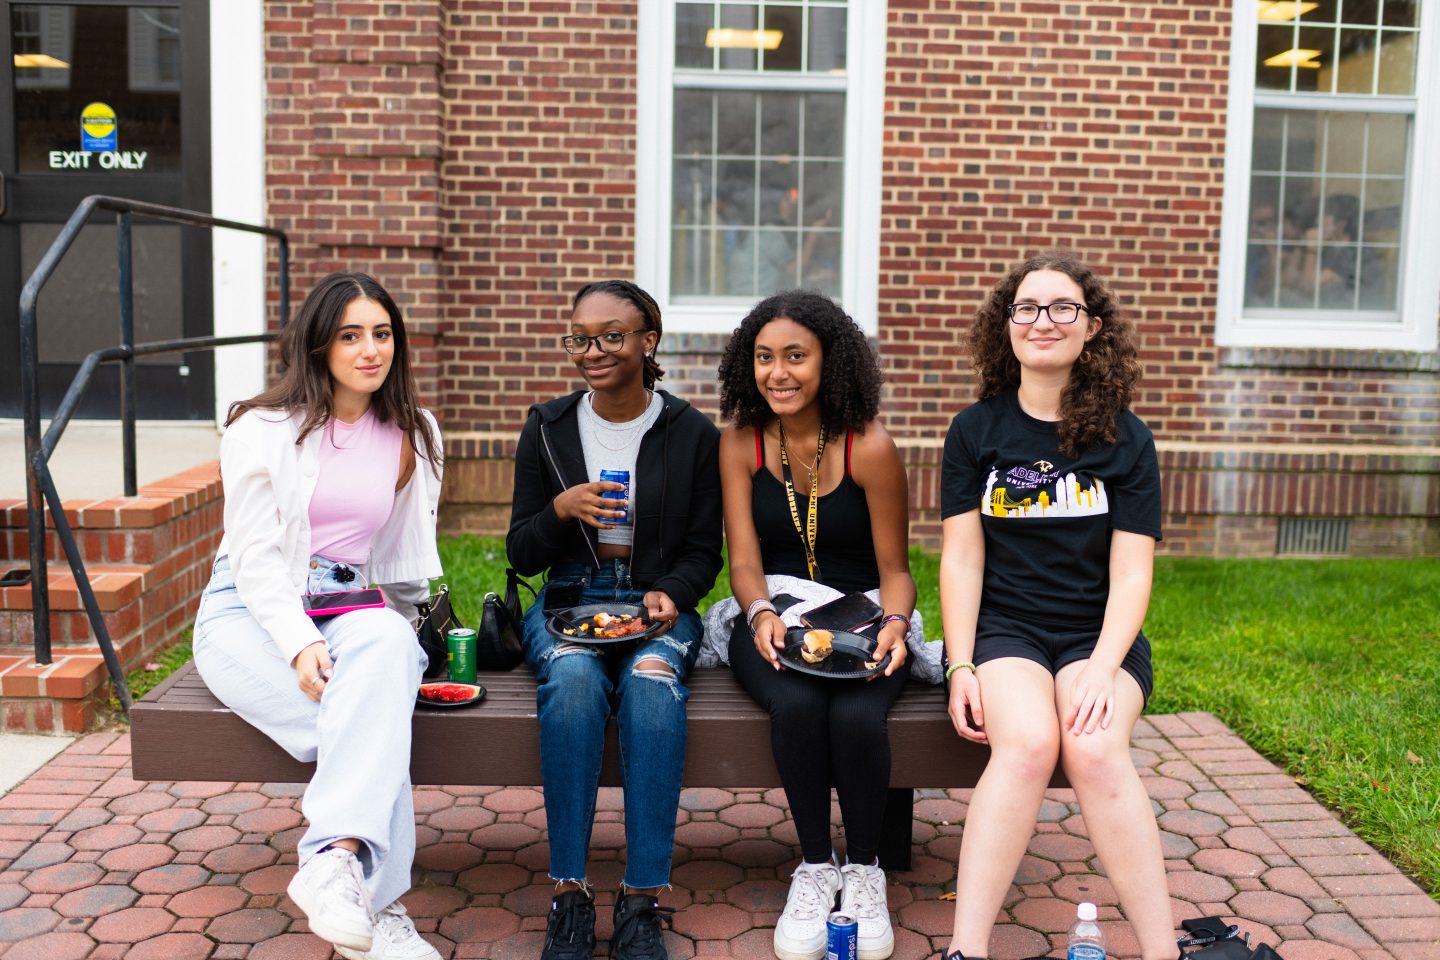 Four students are seated on a bench enjoying food at an outdoor welcome BBQ event on a college campus, with the brick facade of the building serving as a backdrop.